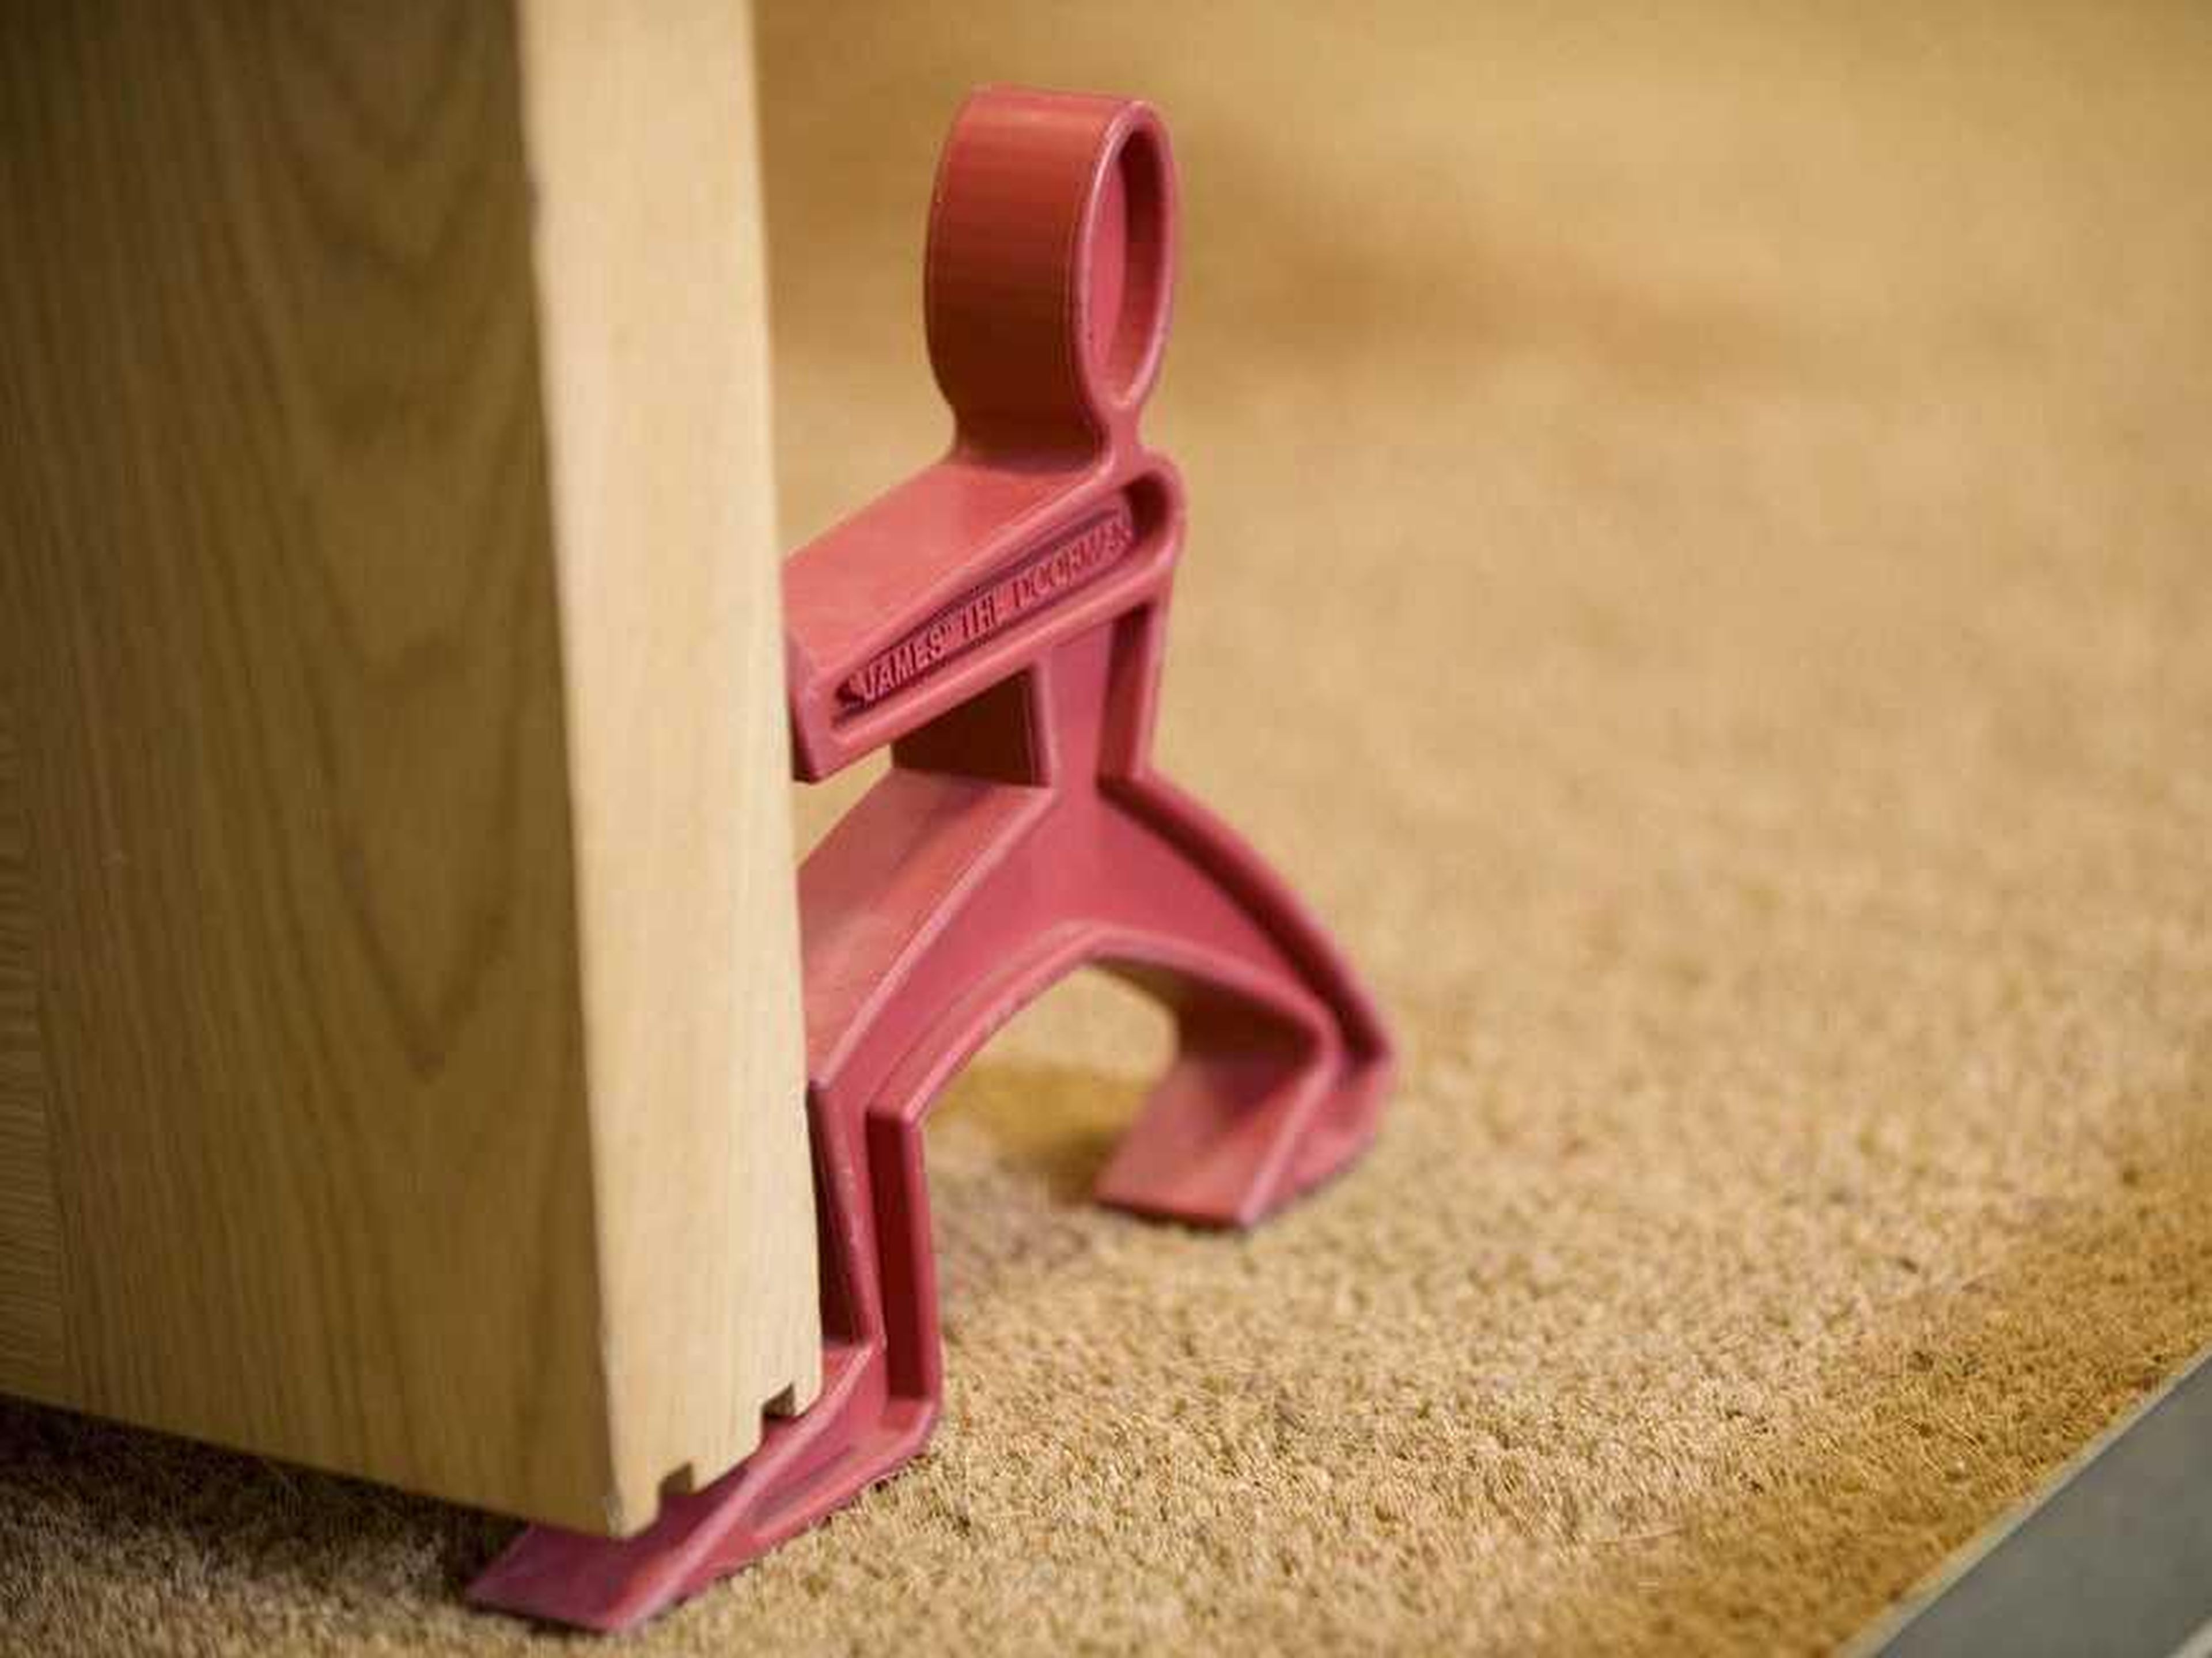 7. Carry a doorstop — and use it in any situation that makes you feel unsafe.